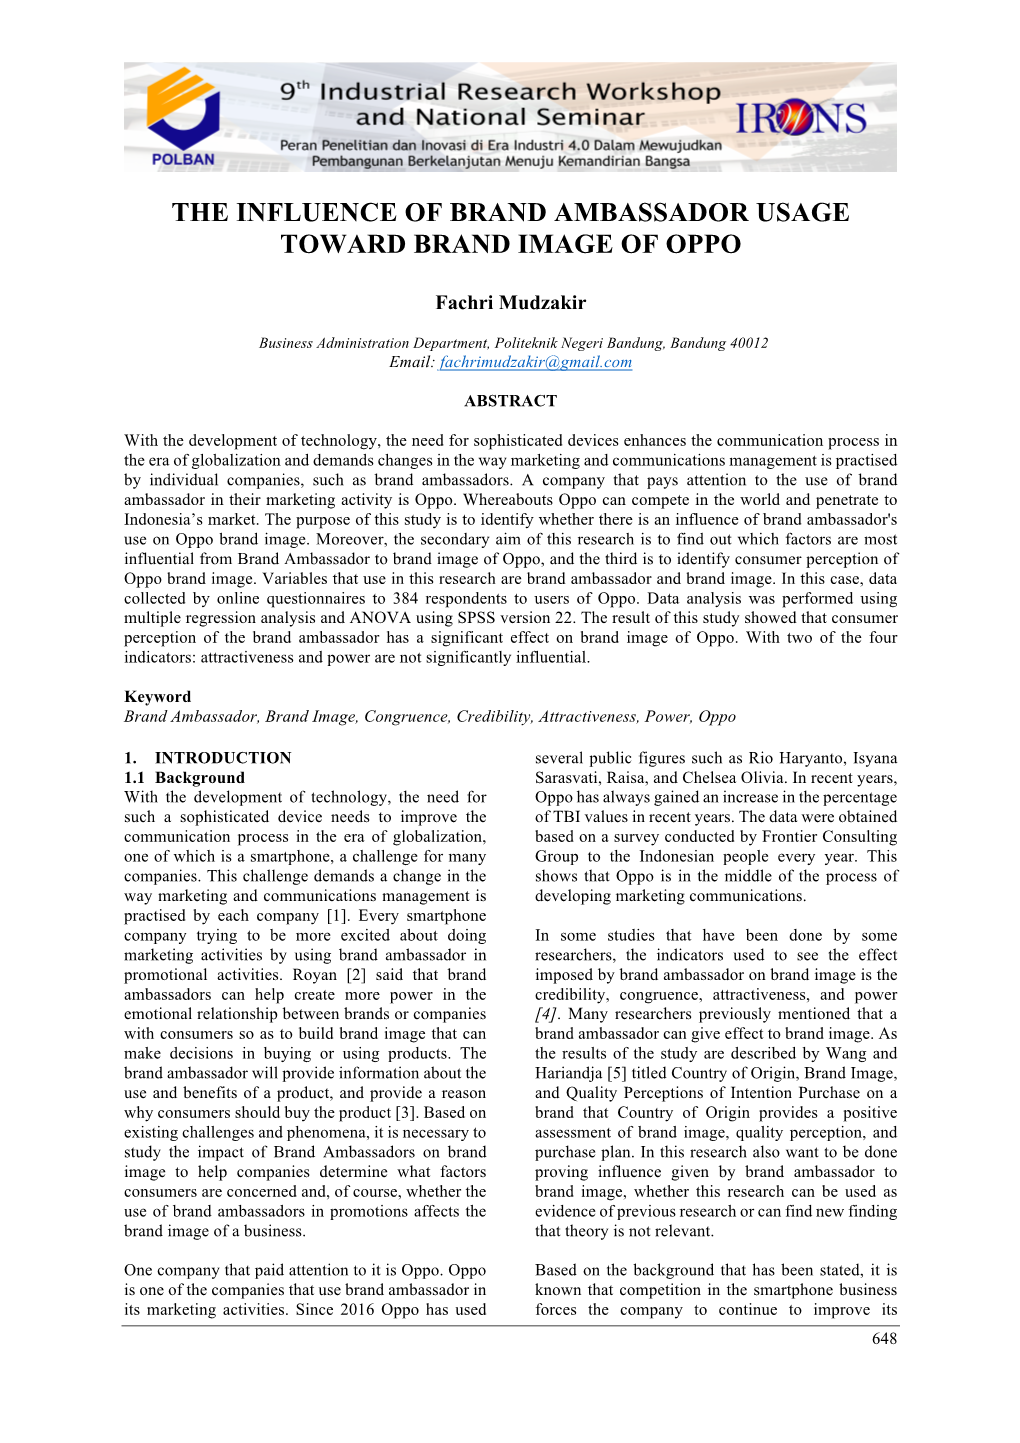 The Influence of Brand Ambassador Usage Toward Brand Image of Oppo